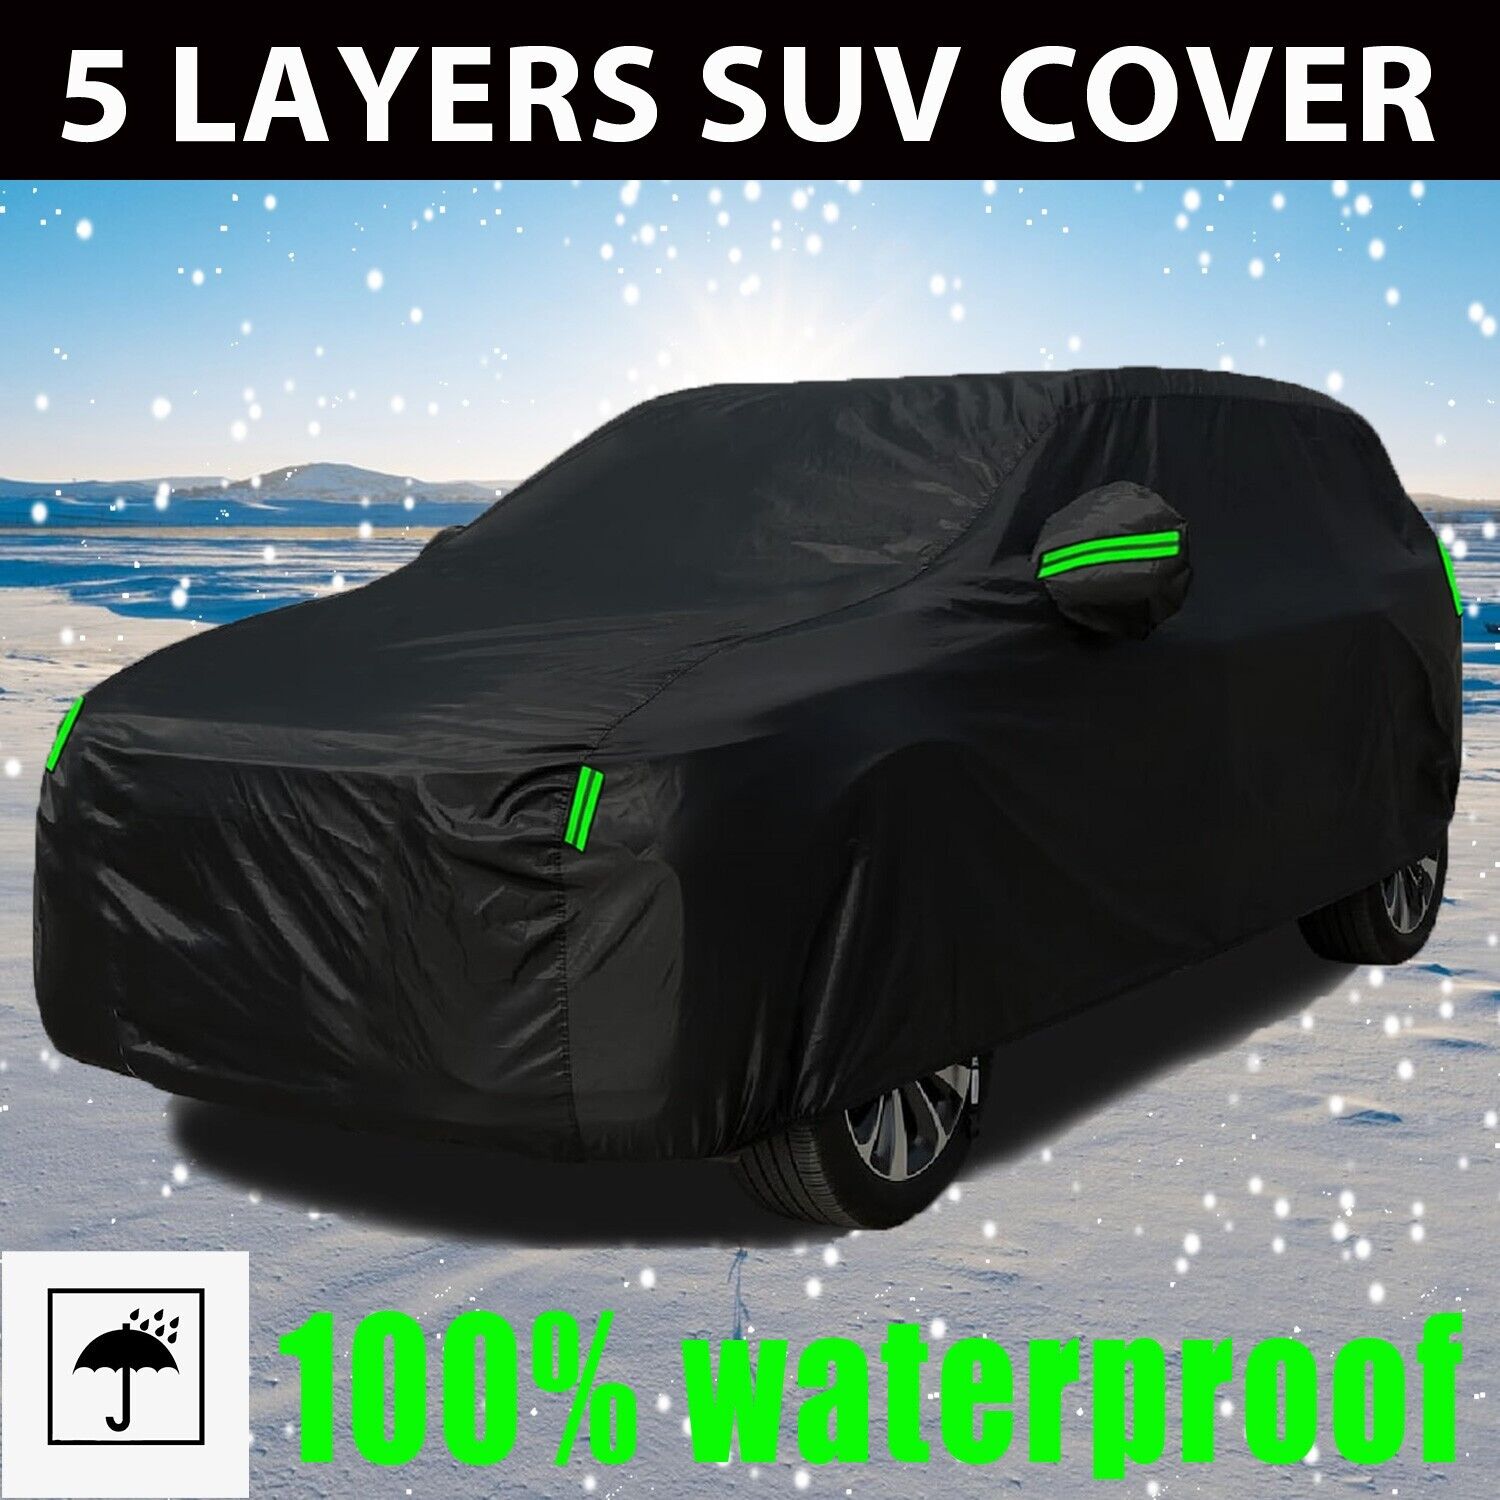 For Hyundai 5 Layers Full Car SUV Cover 100% Waterproof  All Weather Protection